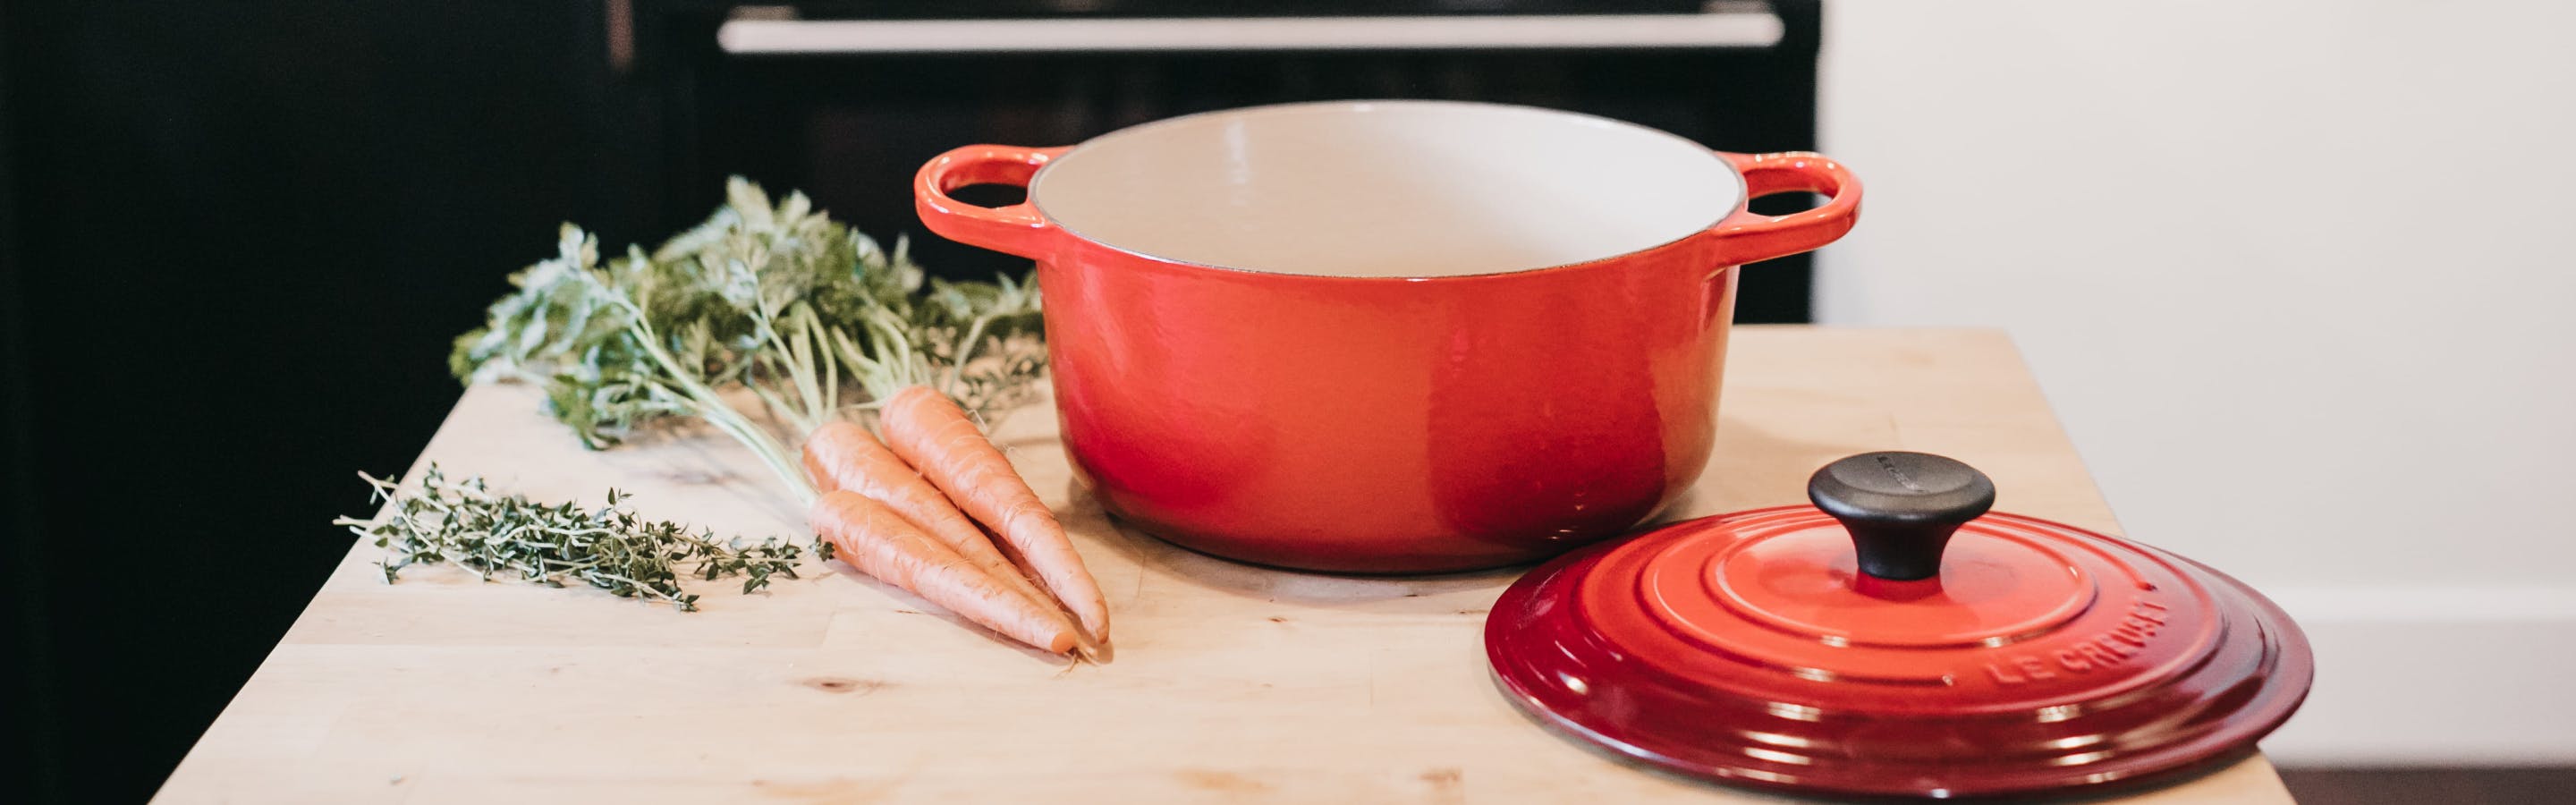 The Best Utensils for Le Creuset Cookware